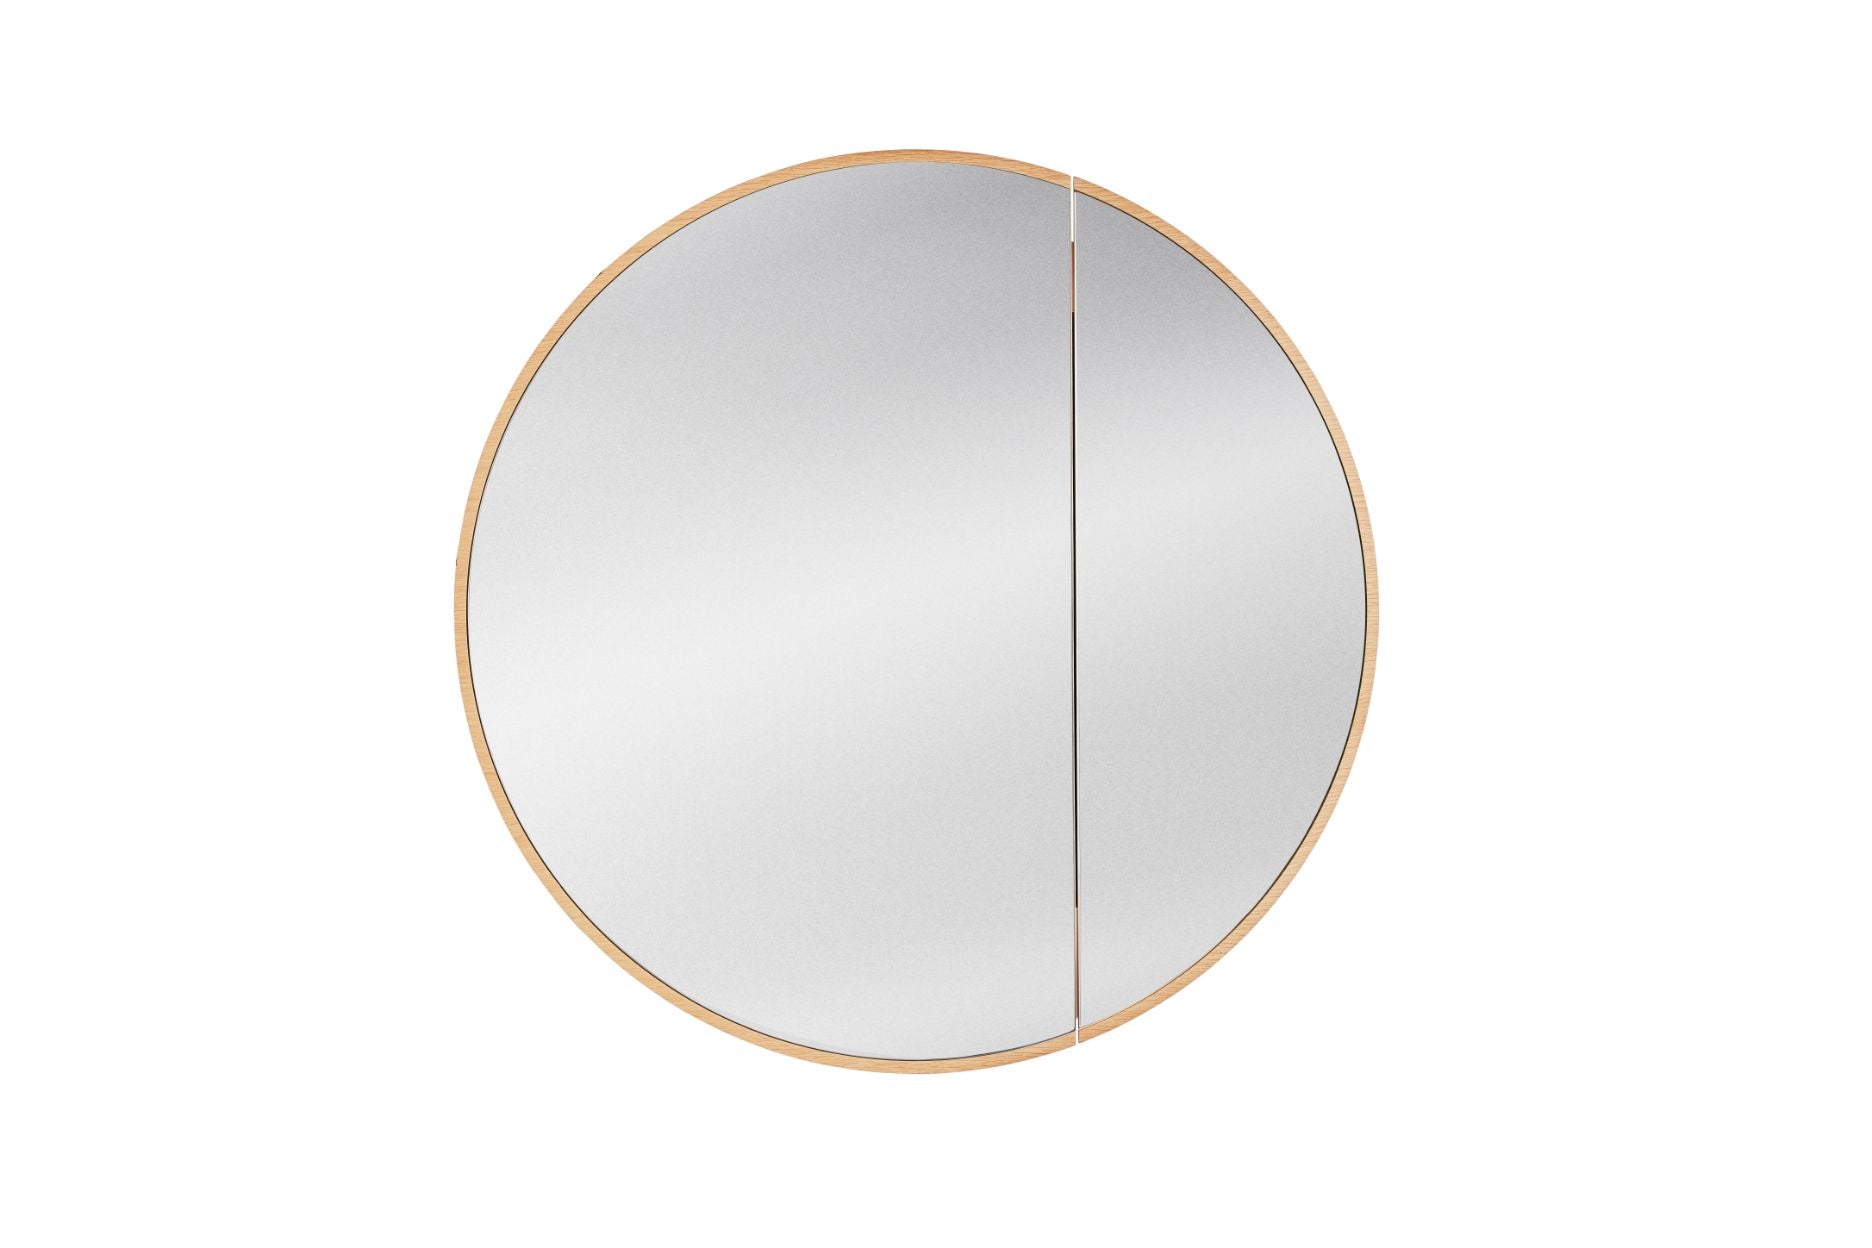 ISSY Halo Mirror with Shaving Cabinet - Zuster Furniture